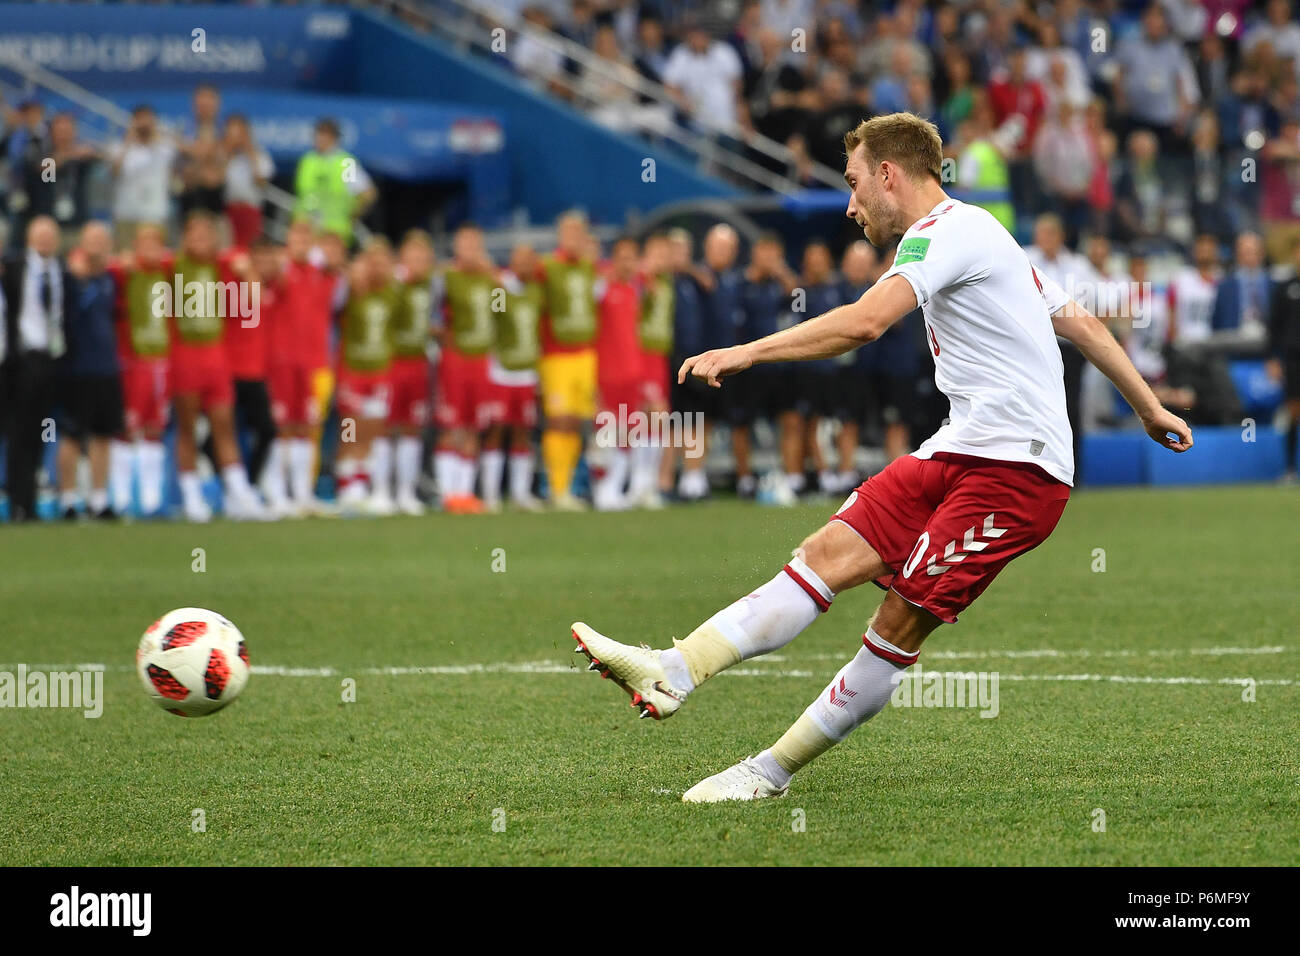 Christian ERIKSEN (DEN) scores his penalty kick. Action, Single Action, Single Image, Cut Out, Full Body Shot, Whole Figure. Croatia (CRO) Denmark (DEN) 4-3 iE Eighth-Finals, Round of 16, Game 52, on Jul 1, 1818 in Nizhny Novgorod, Nizhny Novgorod Stadium. Football World Cup 2018 in Russia from 14.06. - 15.07.2018. | usage worldwide Stock Photo